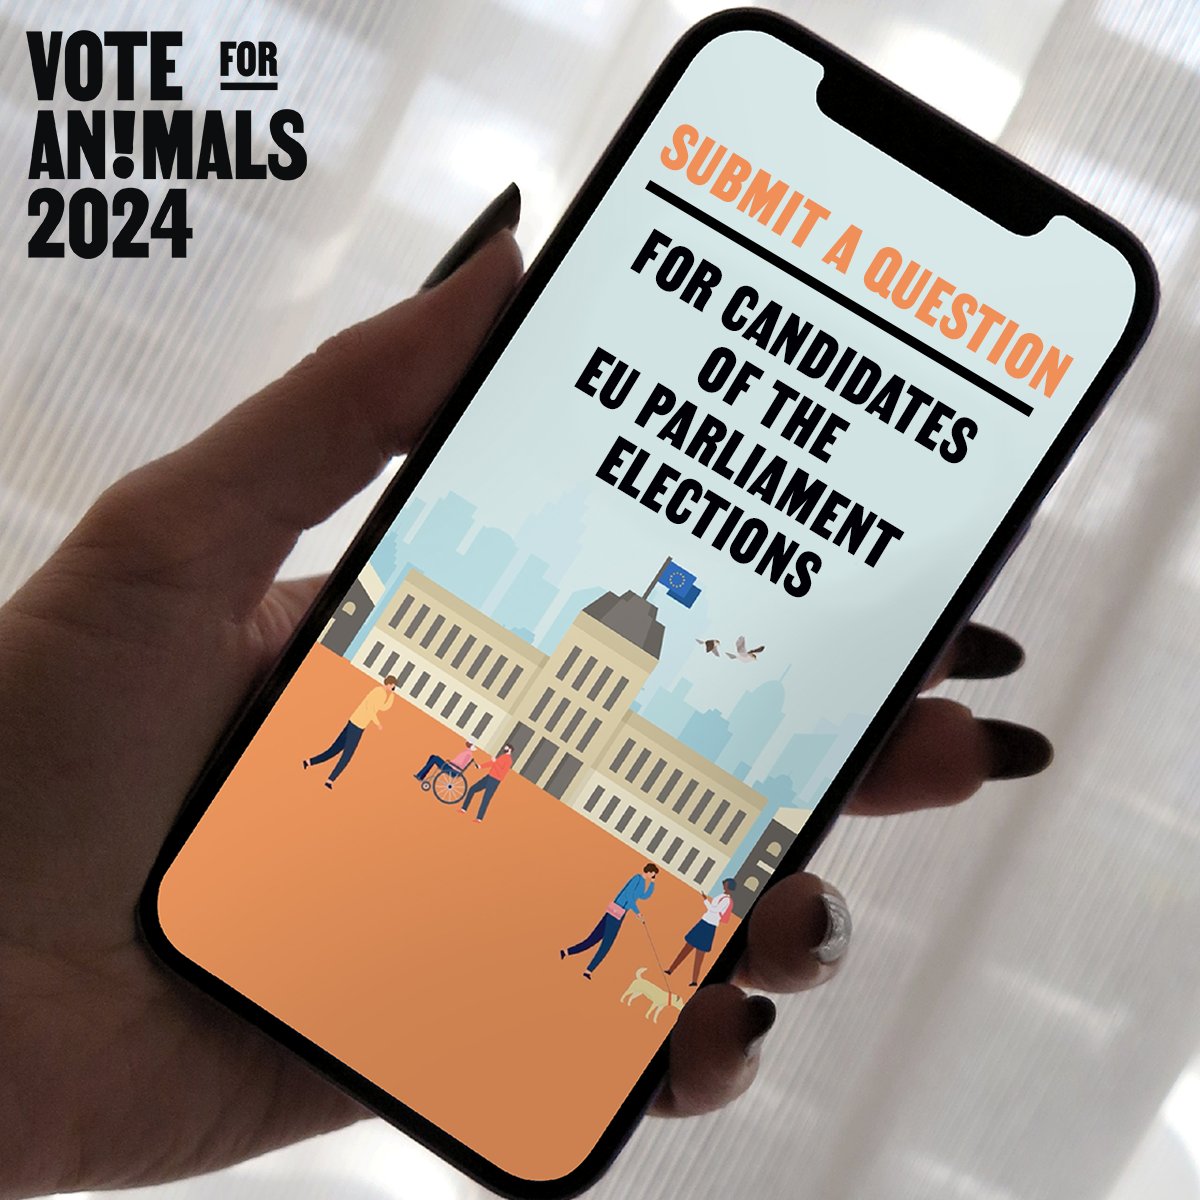 ⏰ LAST DAY to submit your questions to candidates for the #EUelections2024 about their plans for #animalwelfare. They will respond live during the session on 25 April. Submit your questions by 8 April: 📩 send us a DM 💬 leave a comment #VoteforAnimals